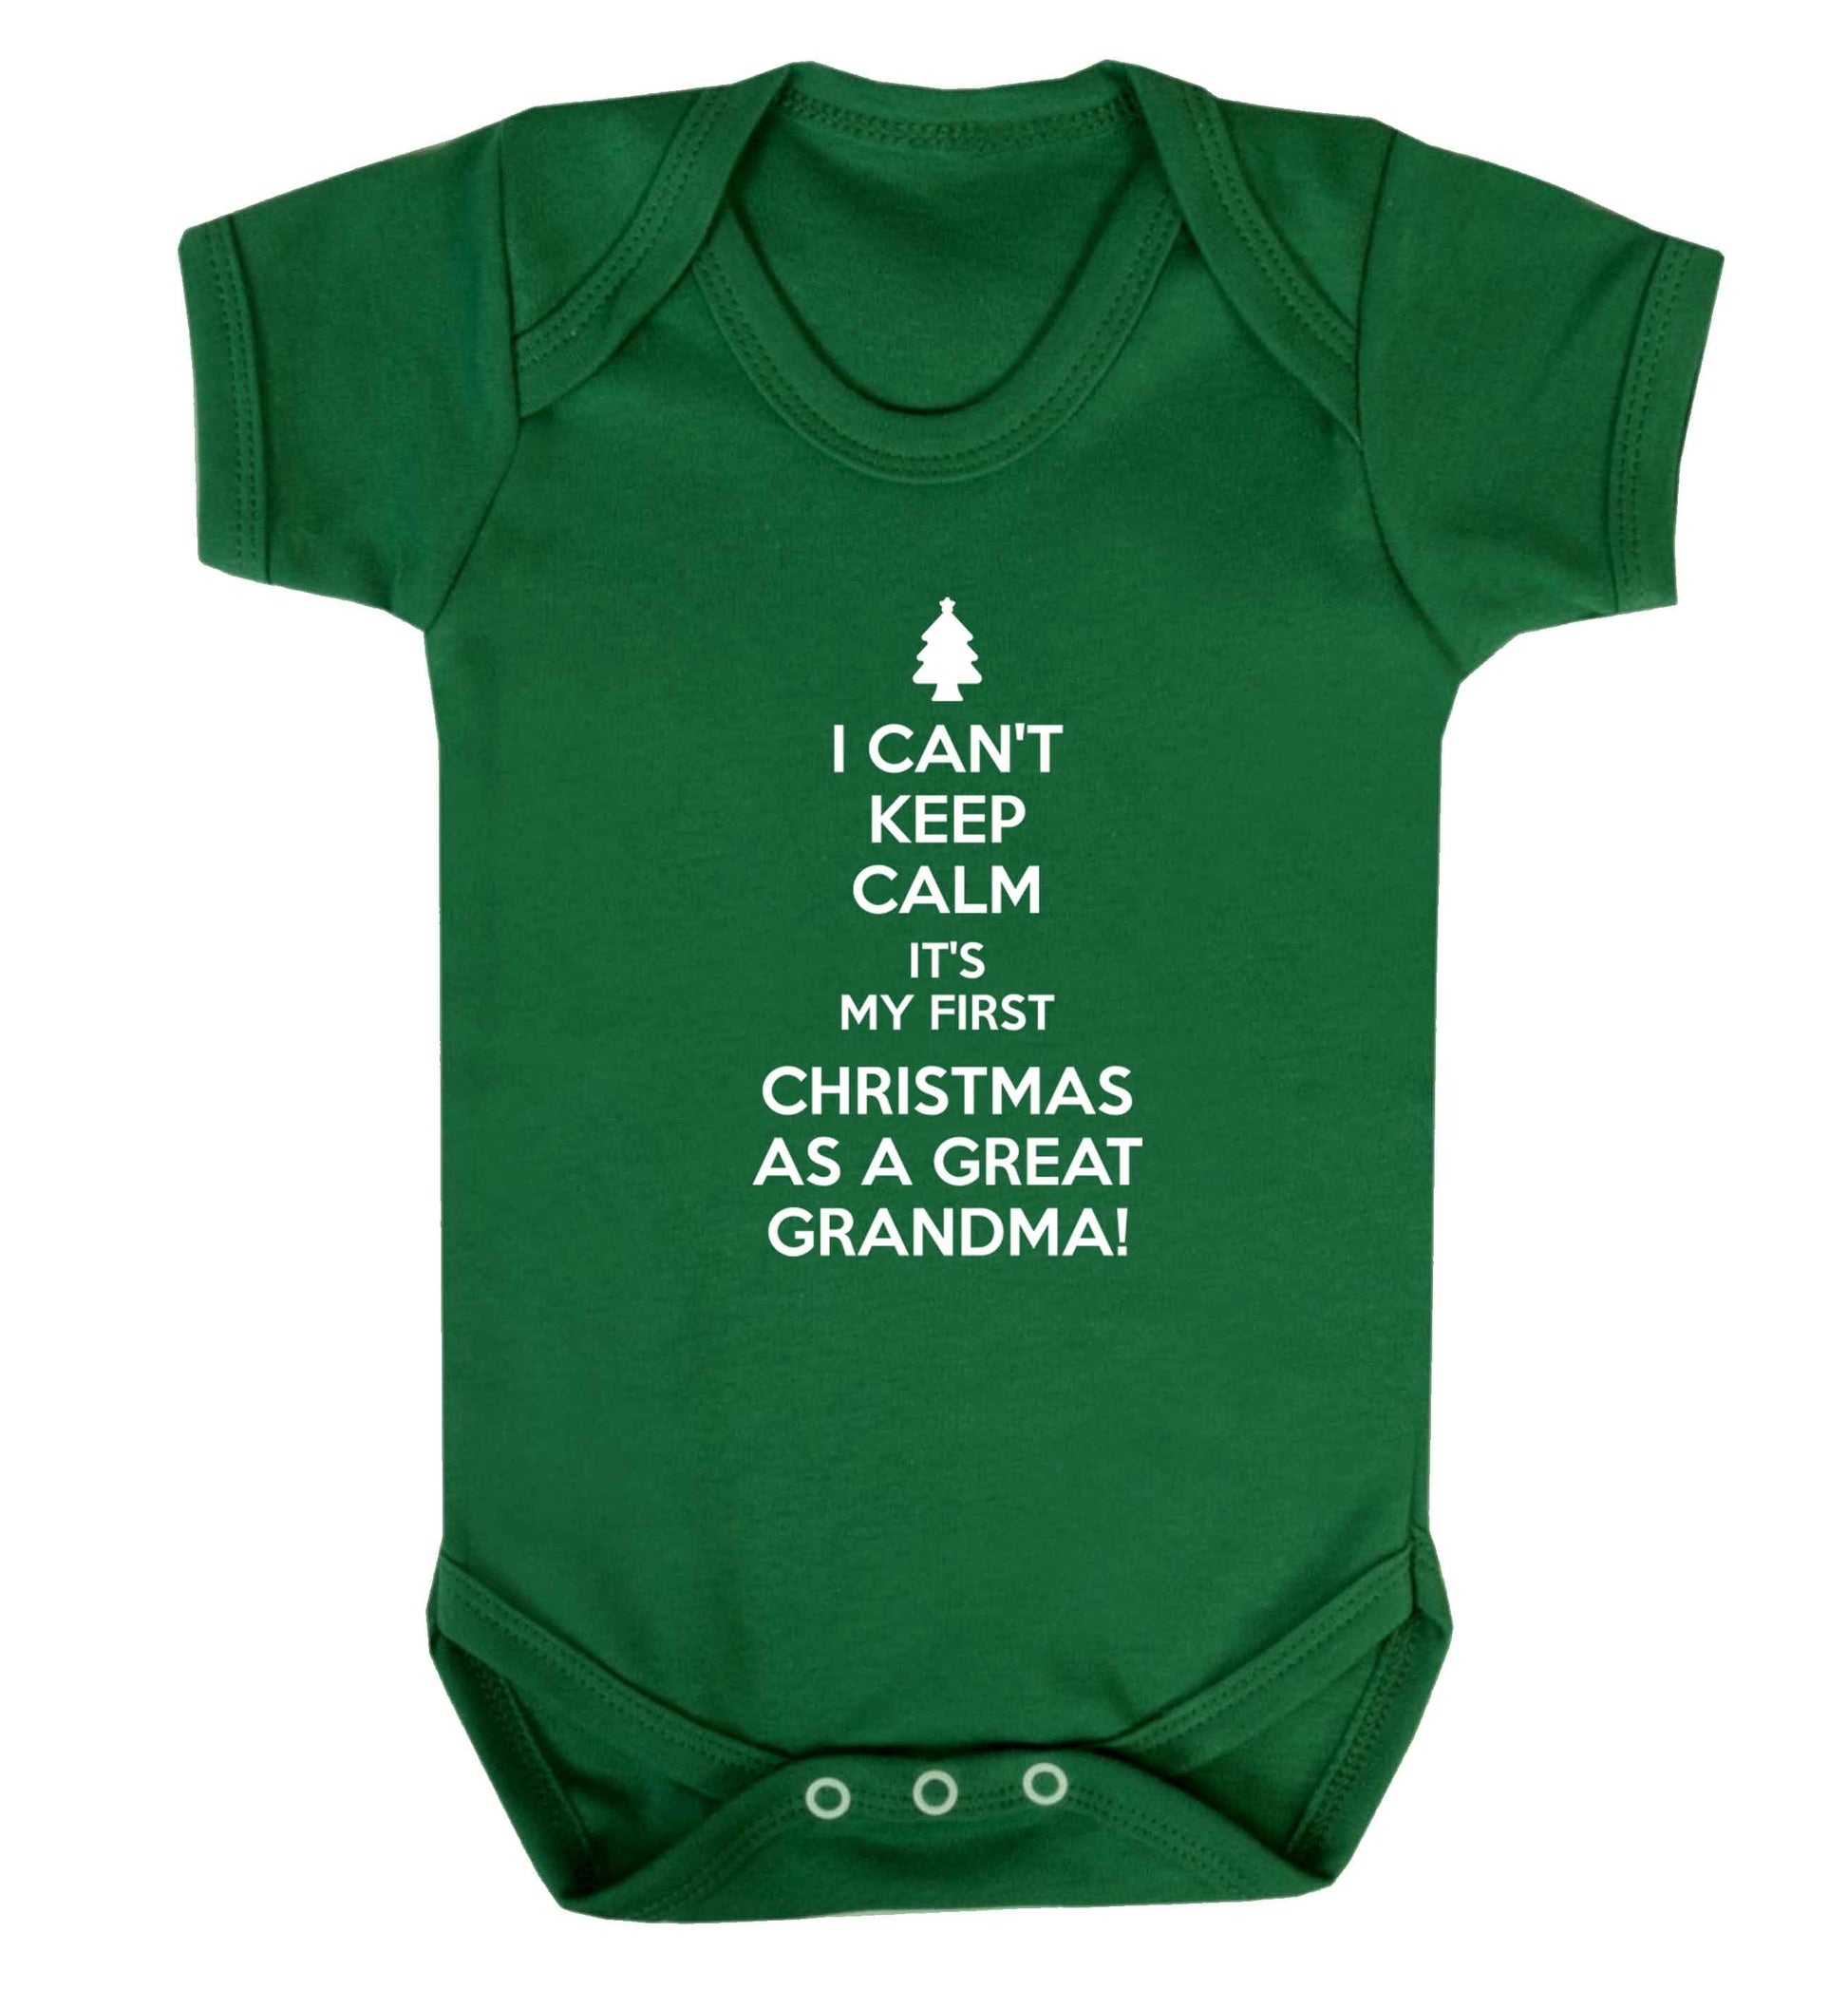 I can't keep calm it's my first Christmas as a great grandma! Baby Vest green 18-24 months